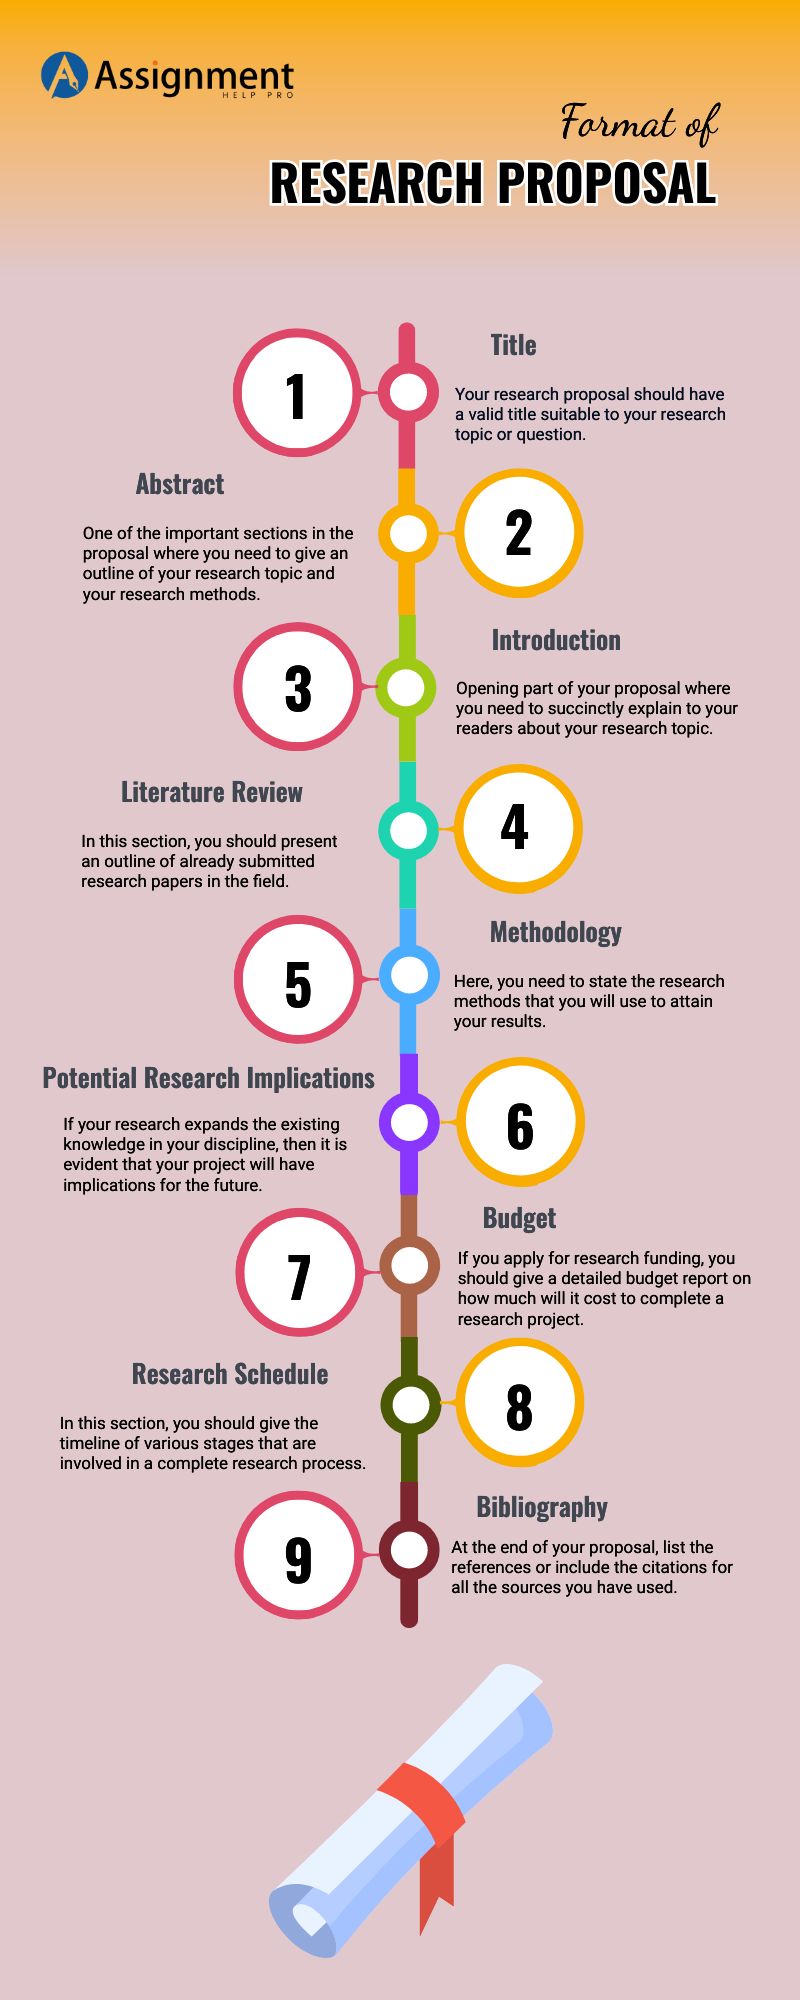 components of a research proposal document